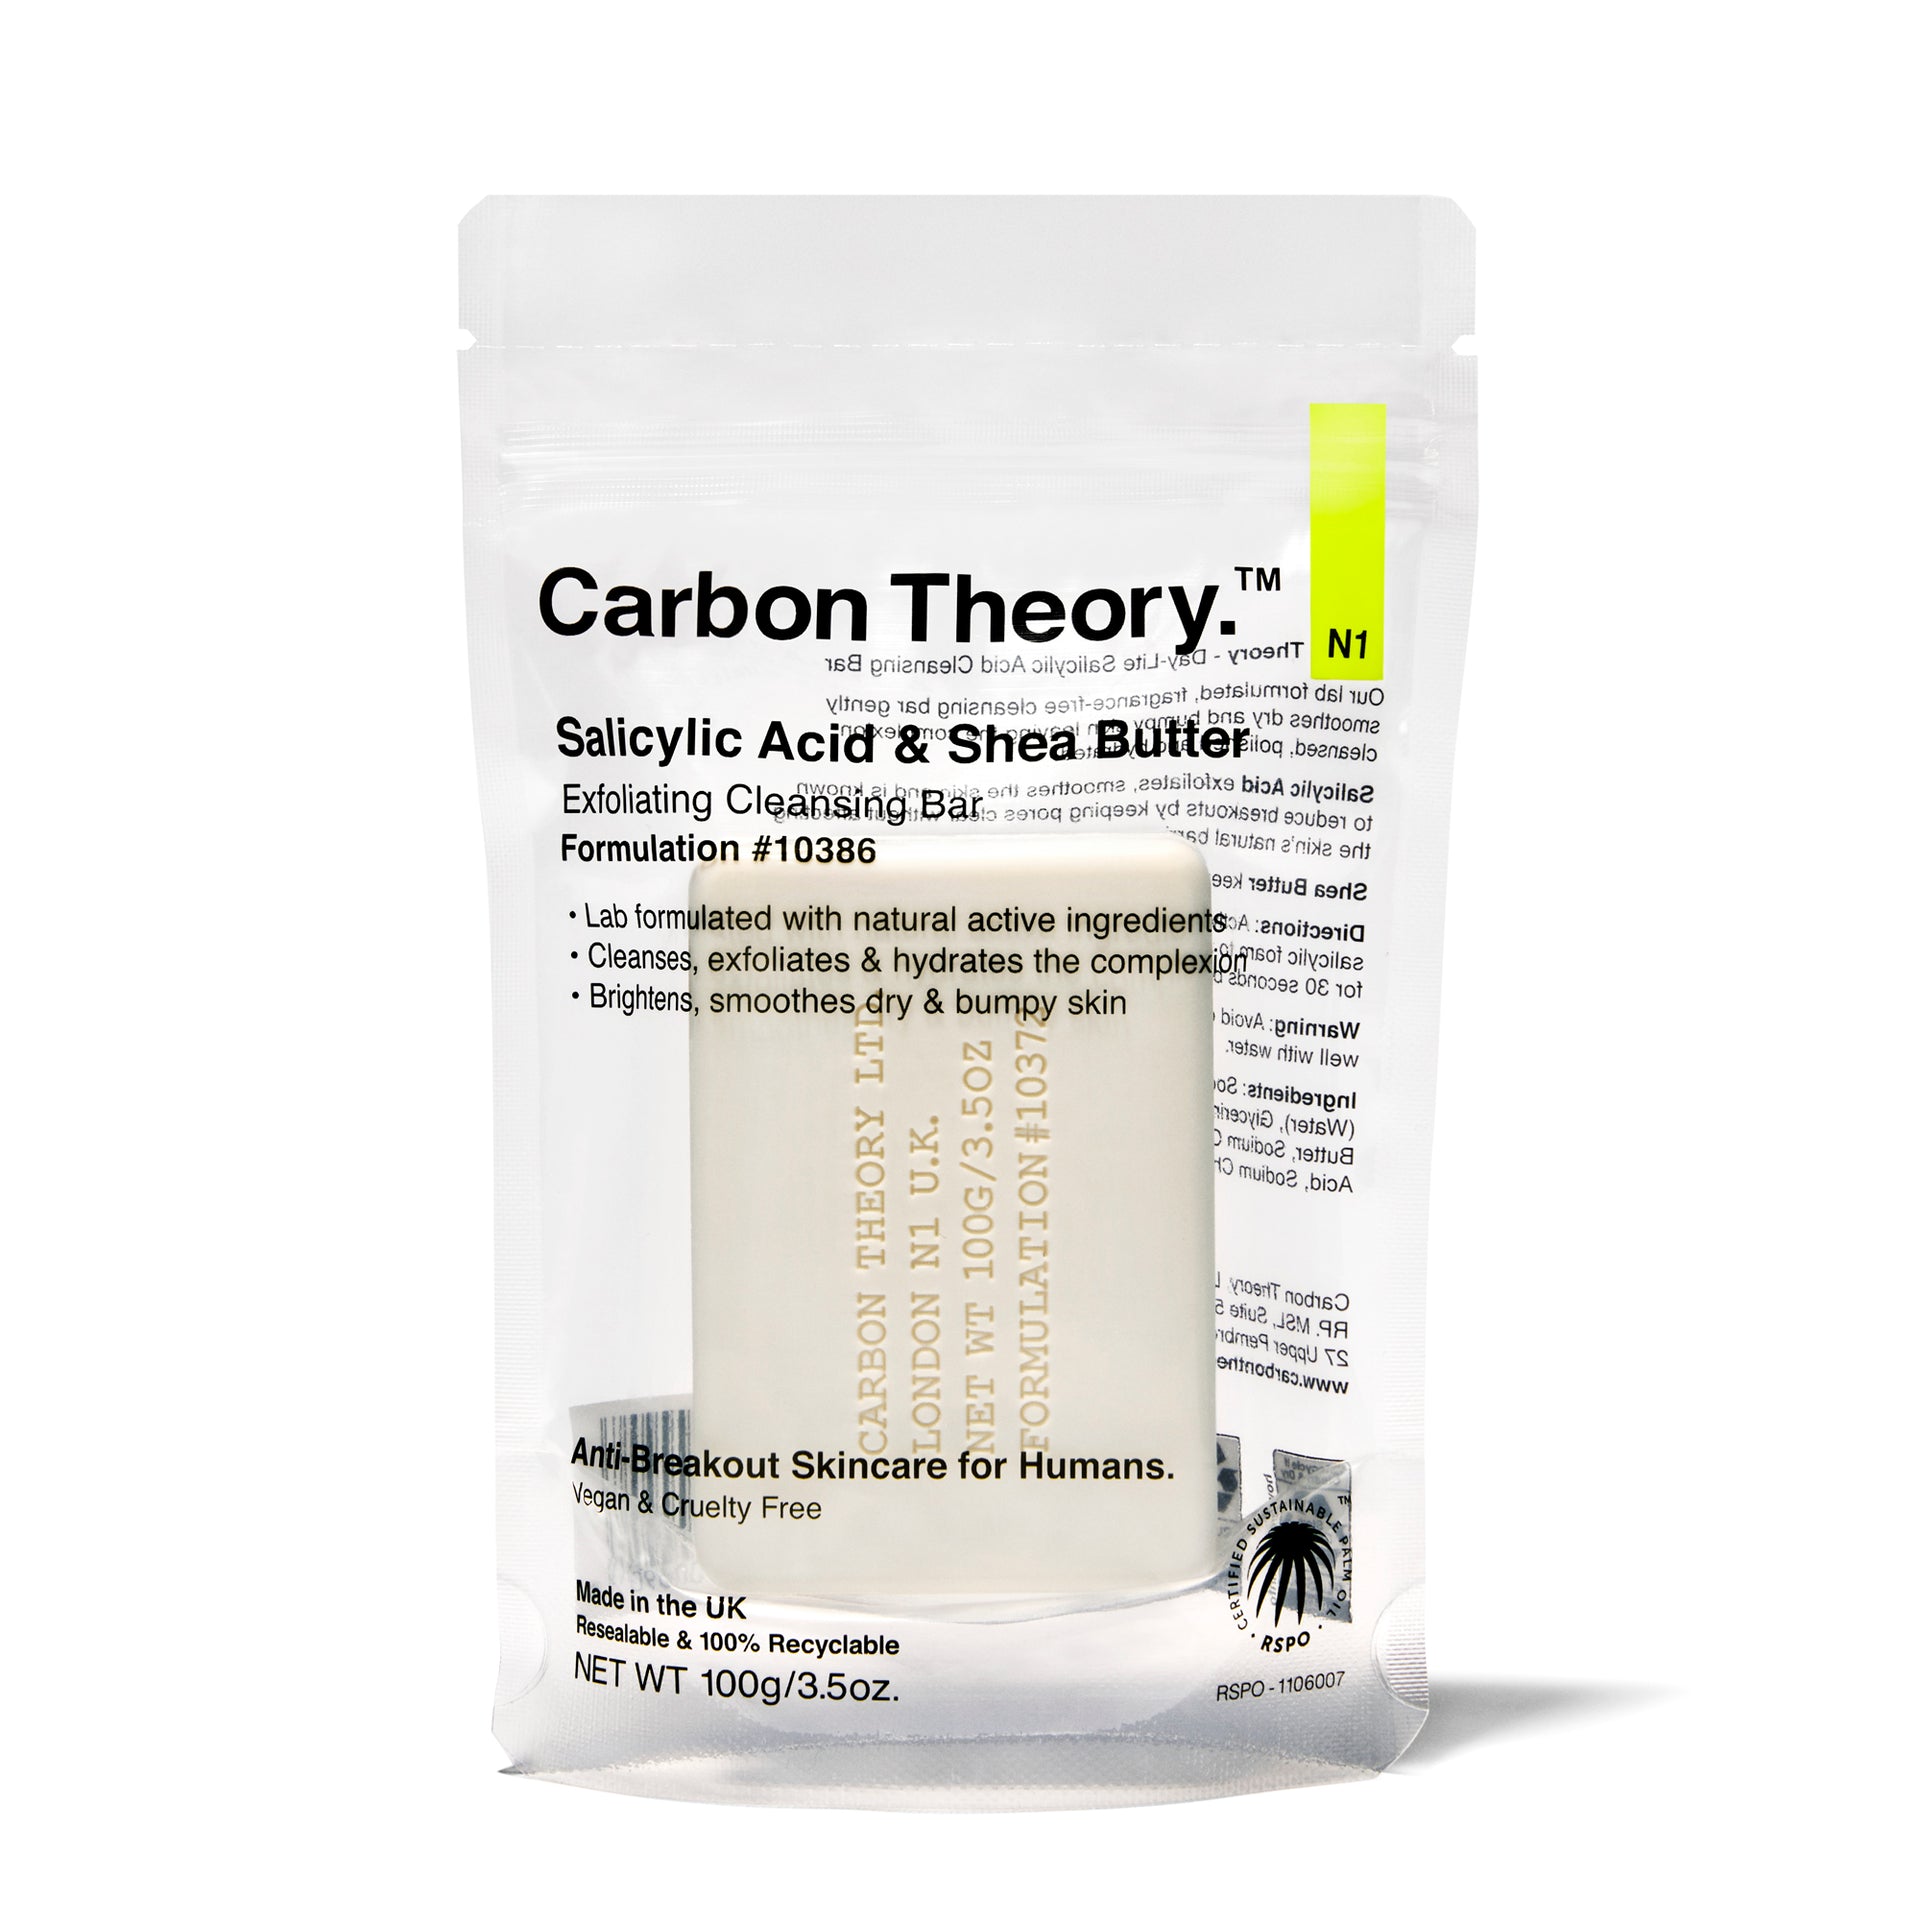 CARBON THEORY - SALICYLIC ACID & SHEA BUTTER EXFOLIATING CLEANSING BAR